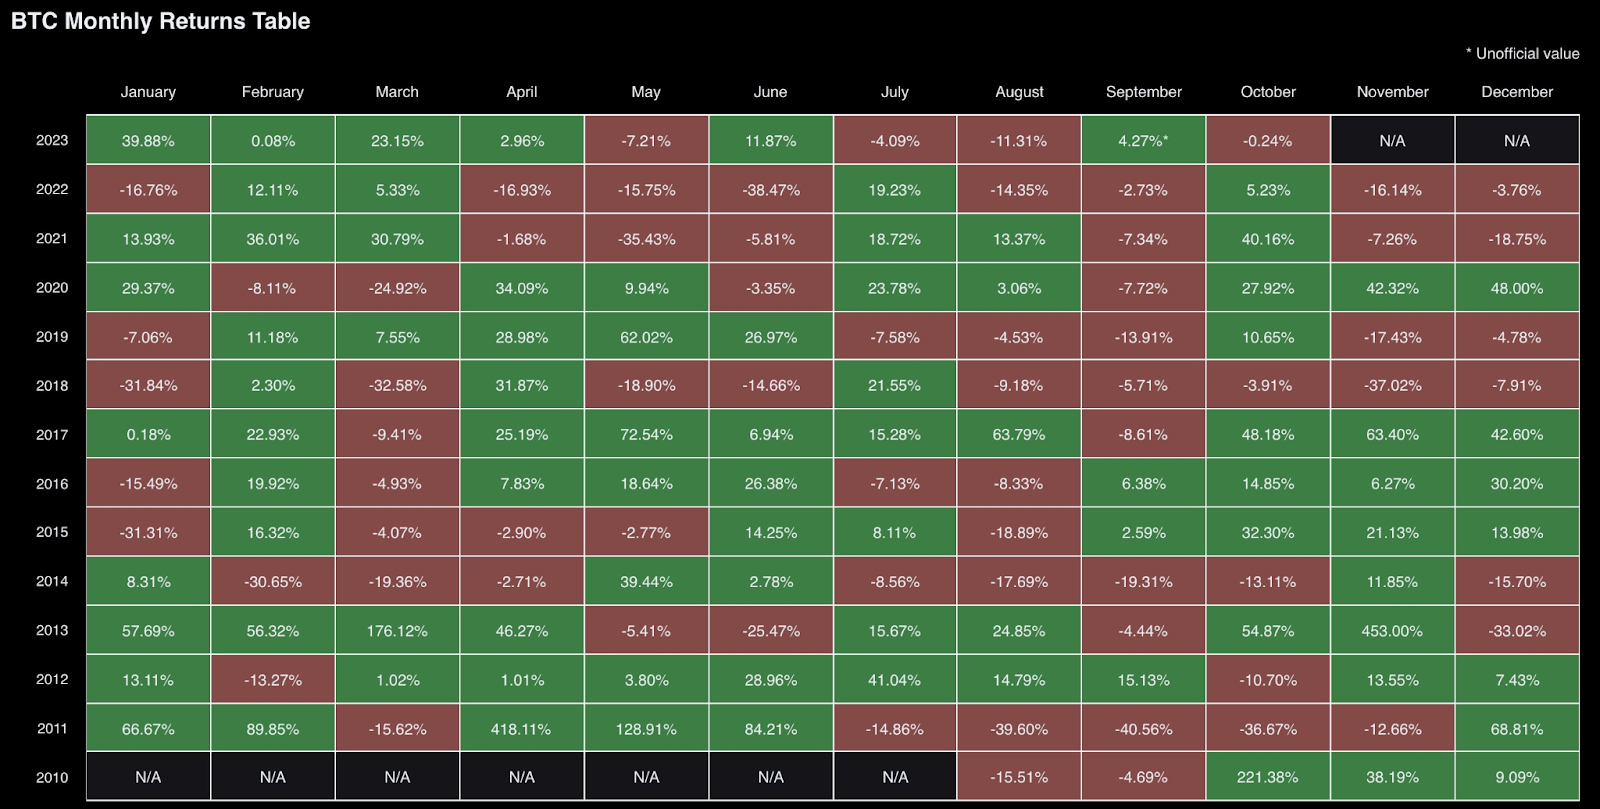 BTC monthly returns table